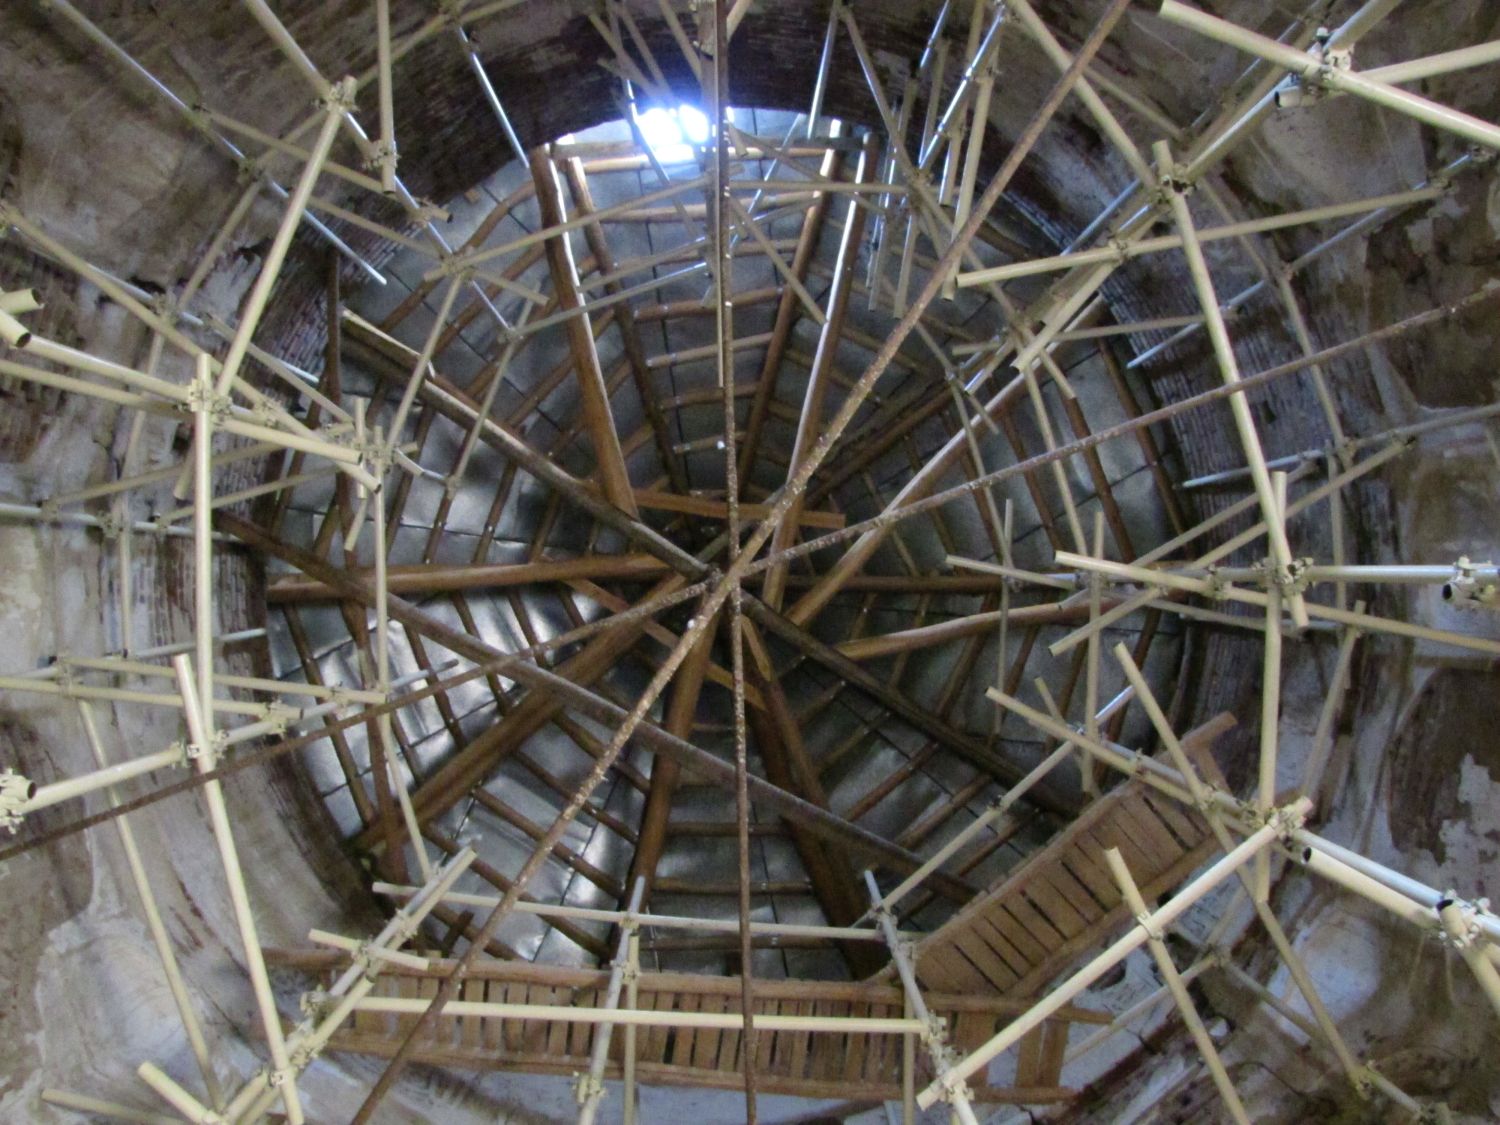 Interior view up at dome with scaffolding and stays in place